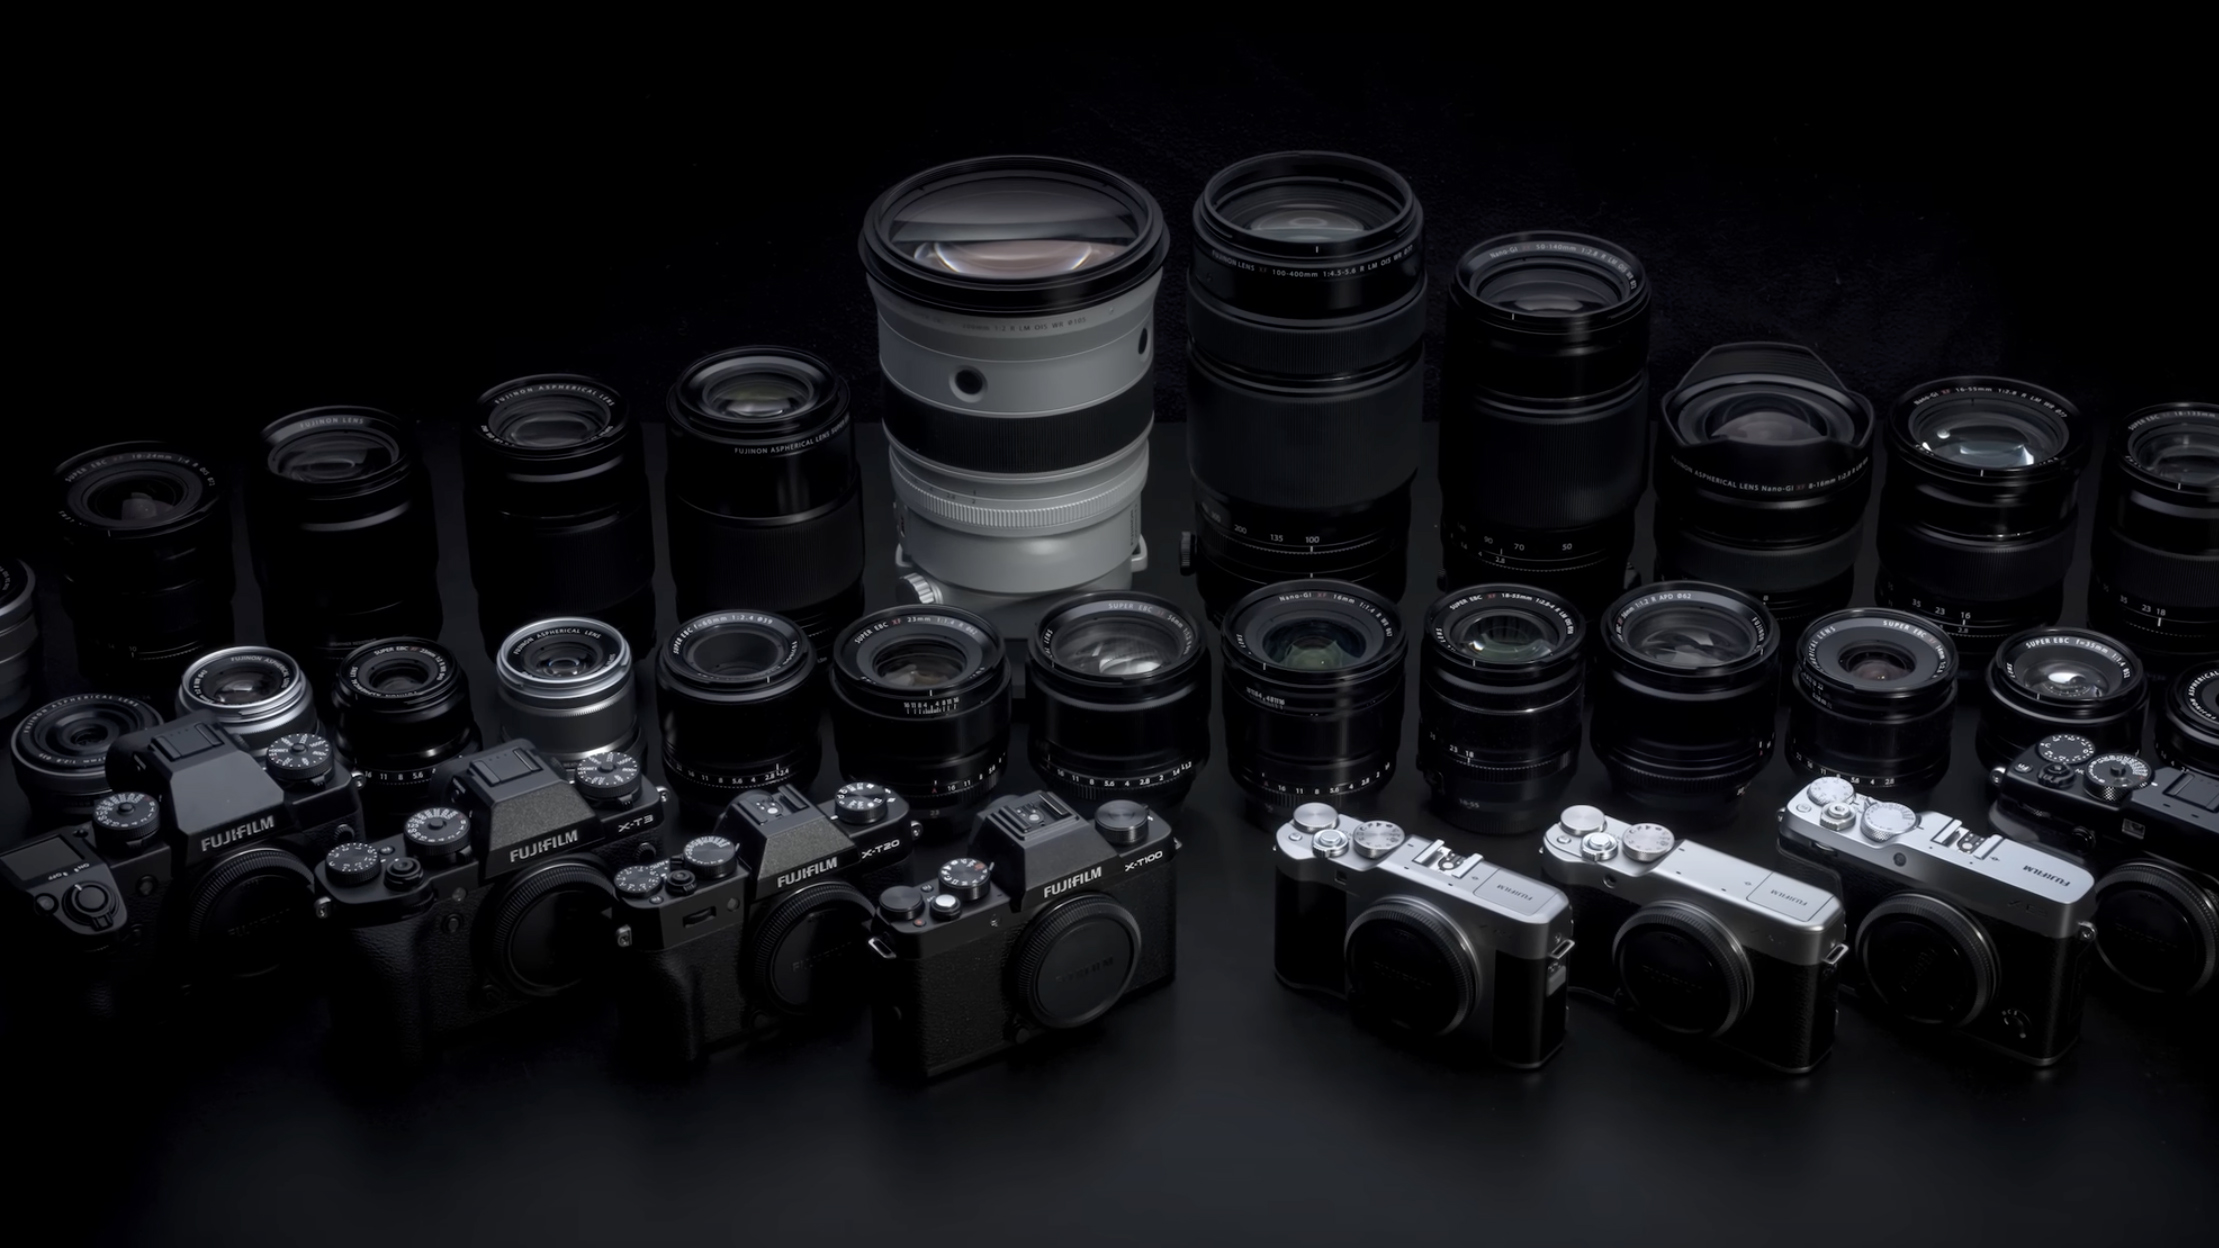 A group of Fujifilm cameras and lenses